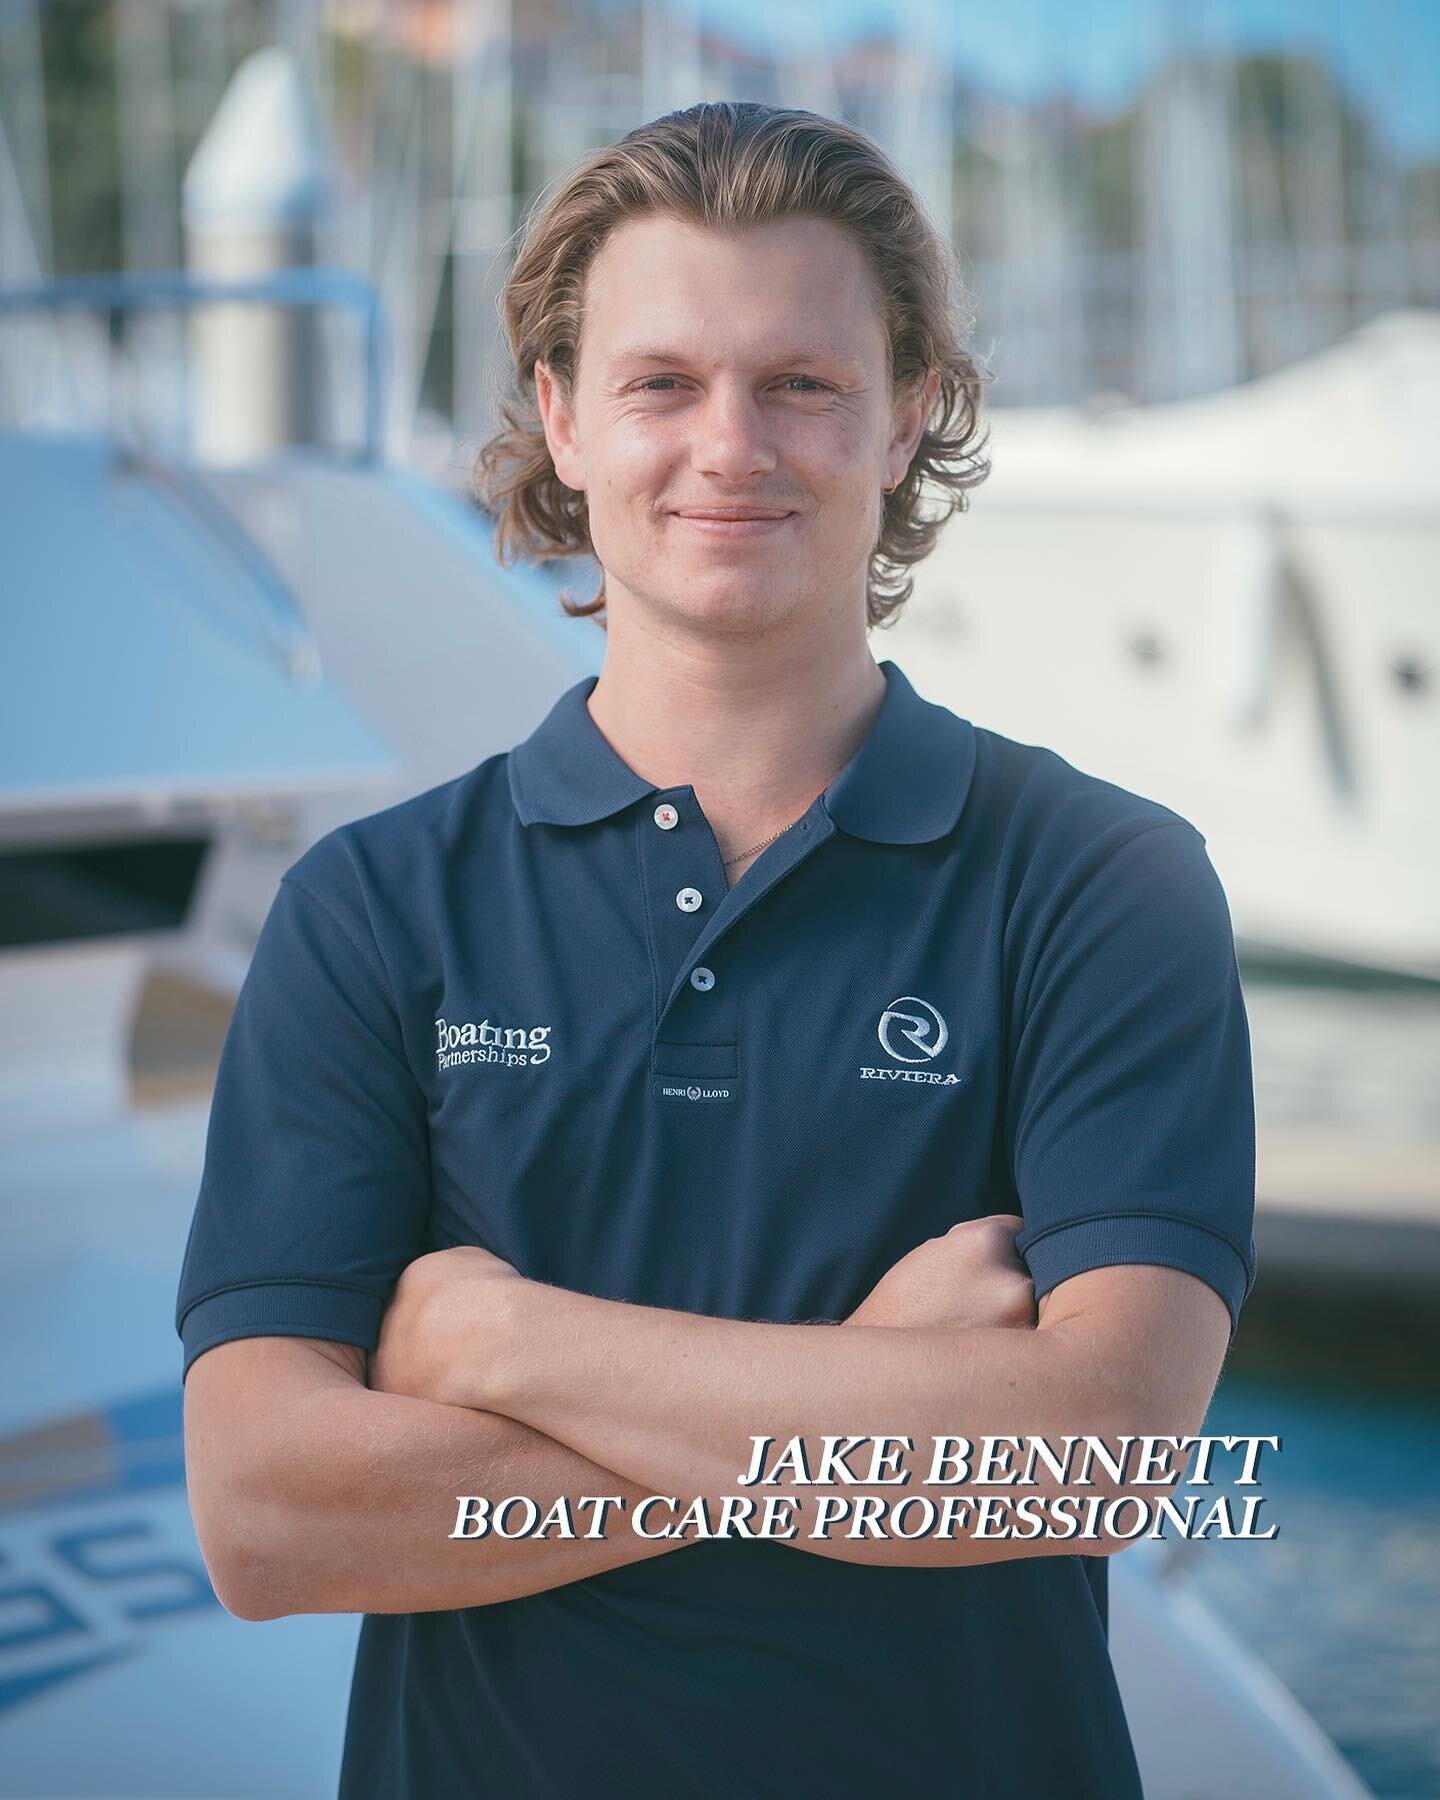 &ldquo;I joined Boating Partnerships over 2 years ago and I have thoroughly enjoyed being apart of the team. Working in the fresh air, overlooking some of the most exceptional views of Sydney is something I definitely don&rsquo;t take for granted&rdq